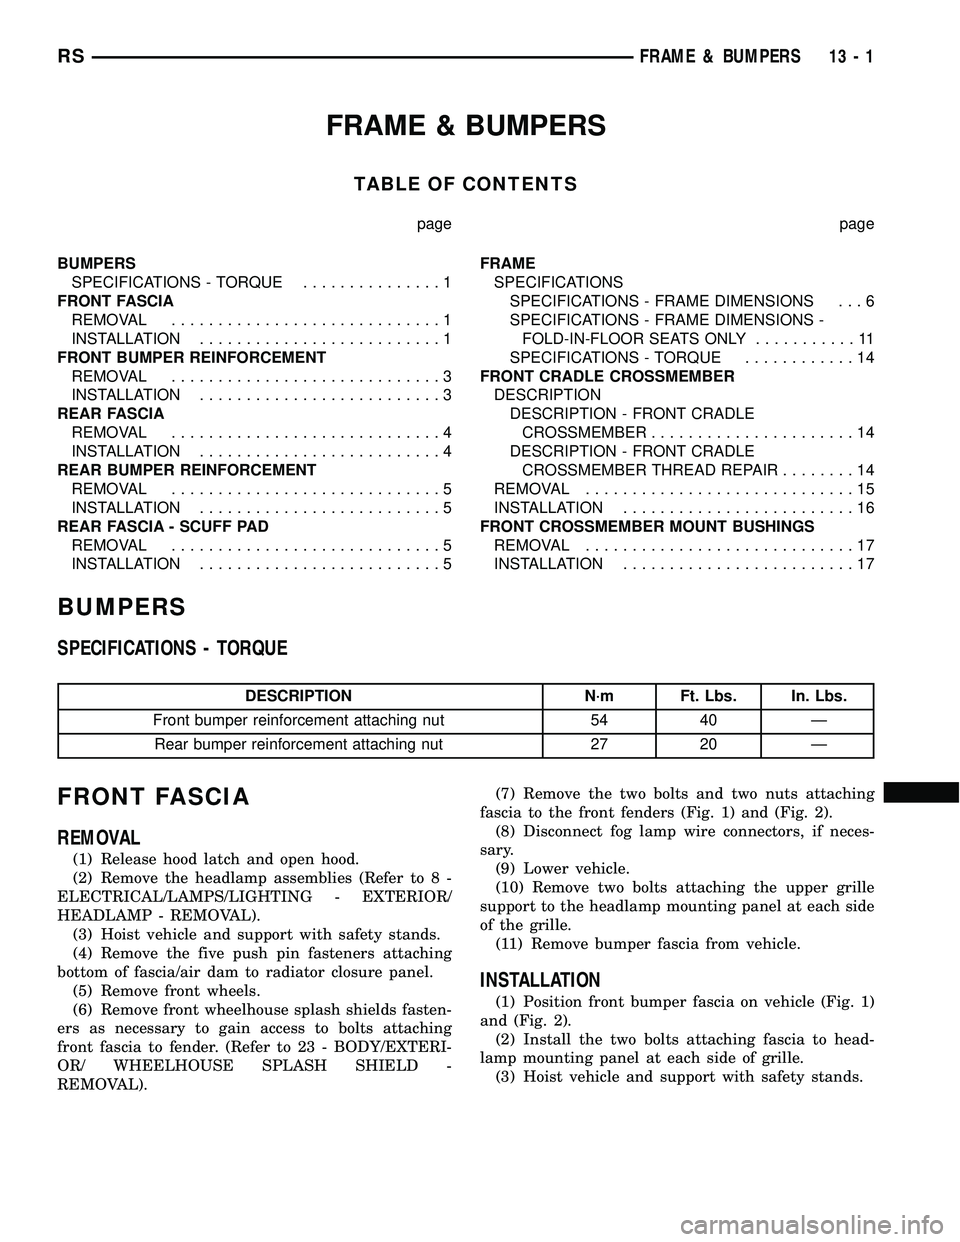 CHRYSLER CARAVAN 2005  Service Manual FRAME & BUMPERS
TABLE OF CONTENTS
page page
BUMPERS
SPECIFICATIONS - TORQUE...............1
FRONT FASCIA
REMOVAL.............................1
INSTALLATION..........................1
FRONT BUMPER REIN